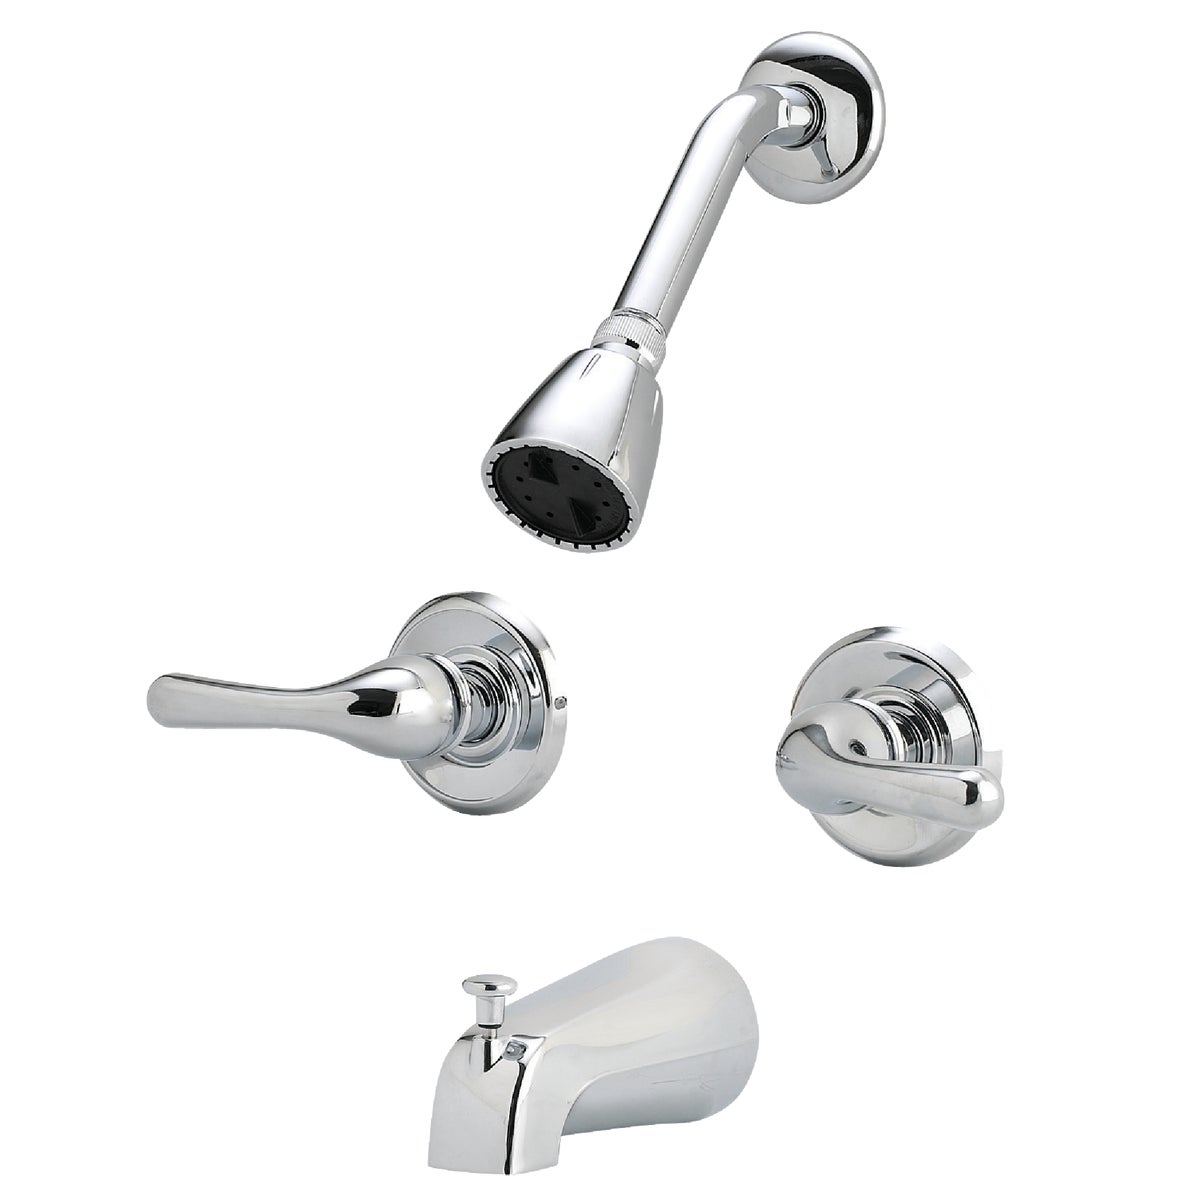 Item 400713, 2-handle metallic tub and shower faucet with metal lever handles. 1.